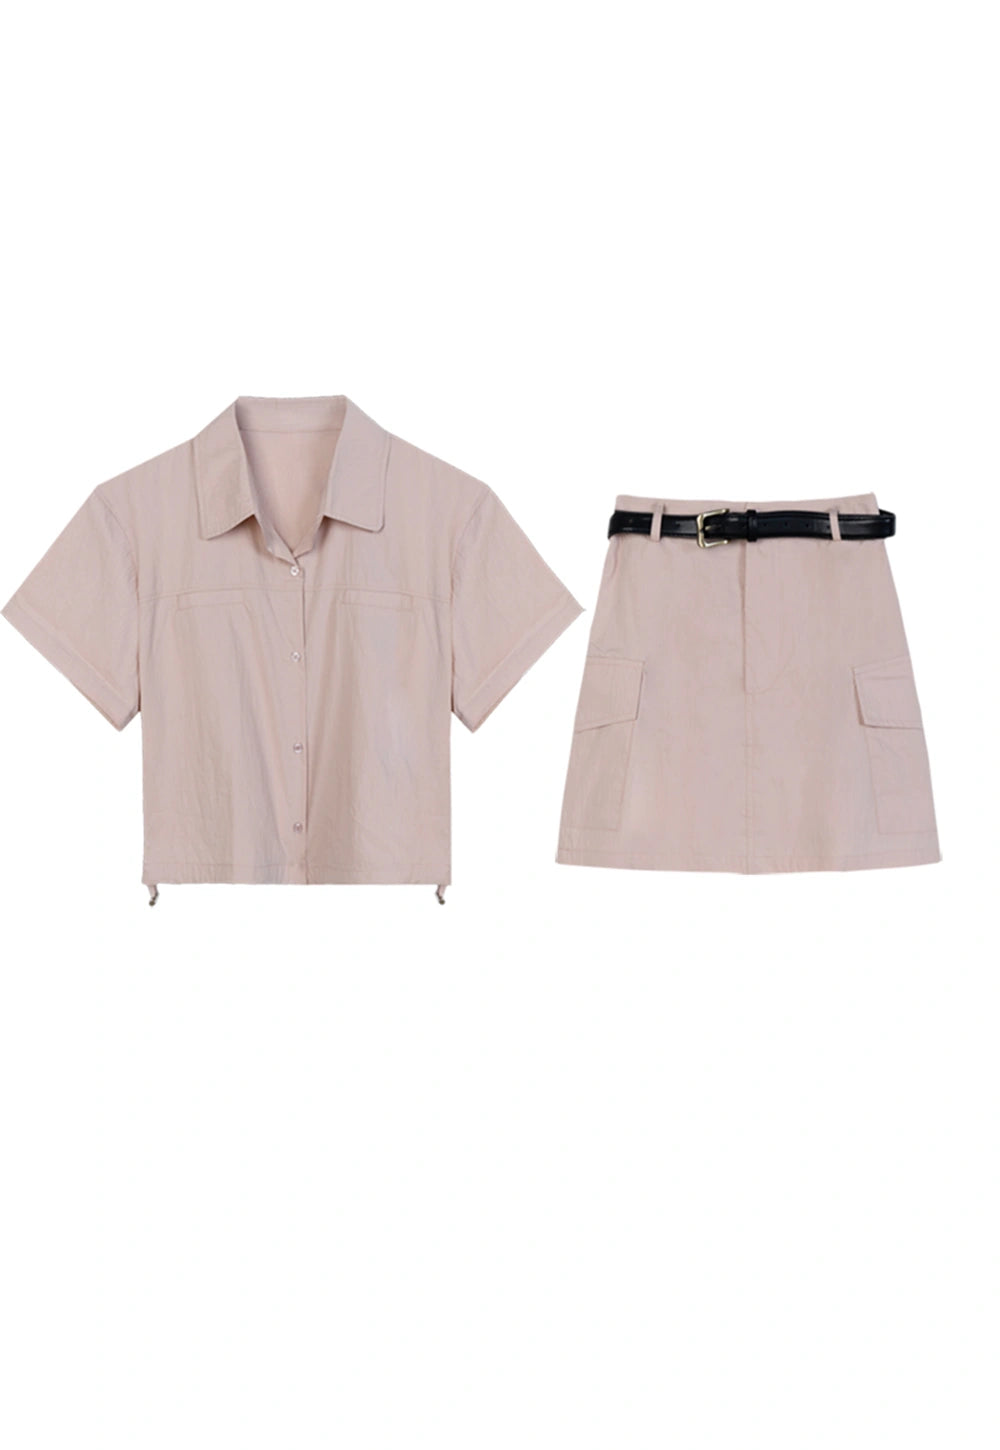 Women's Casual Light Pink Short Sleeve Shirt with Front Pockets and Matching Mini Skirt with Black Belt - Trendy Summer Outfit